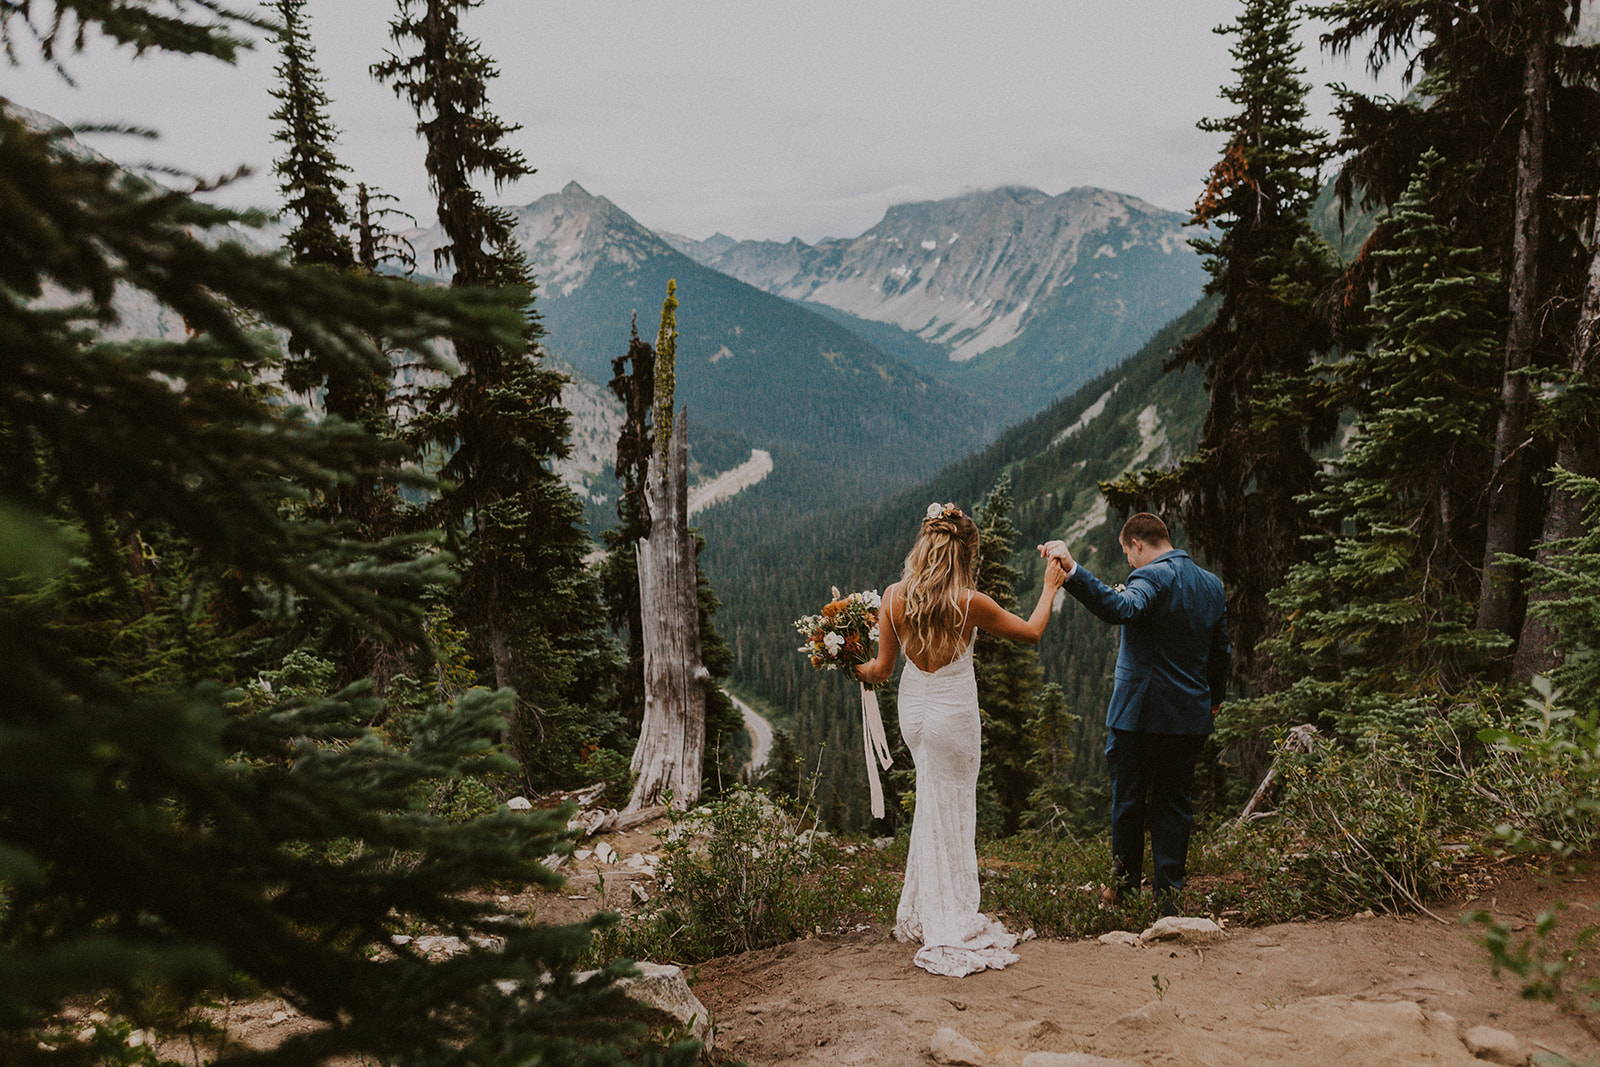 Bride wearing low back lace dress and groom in between trees in North Cascades National Park